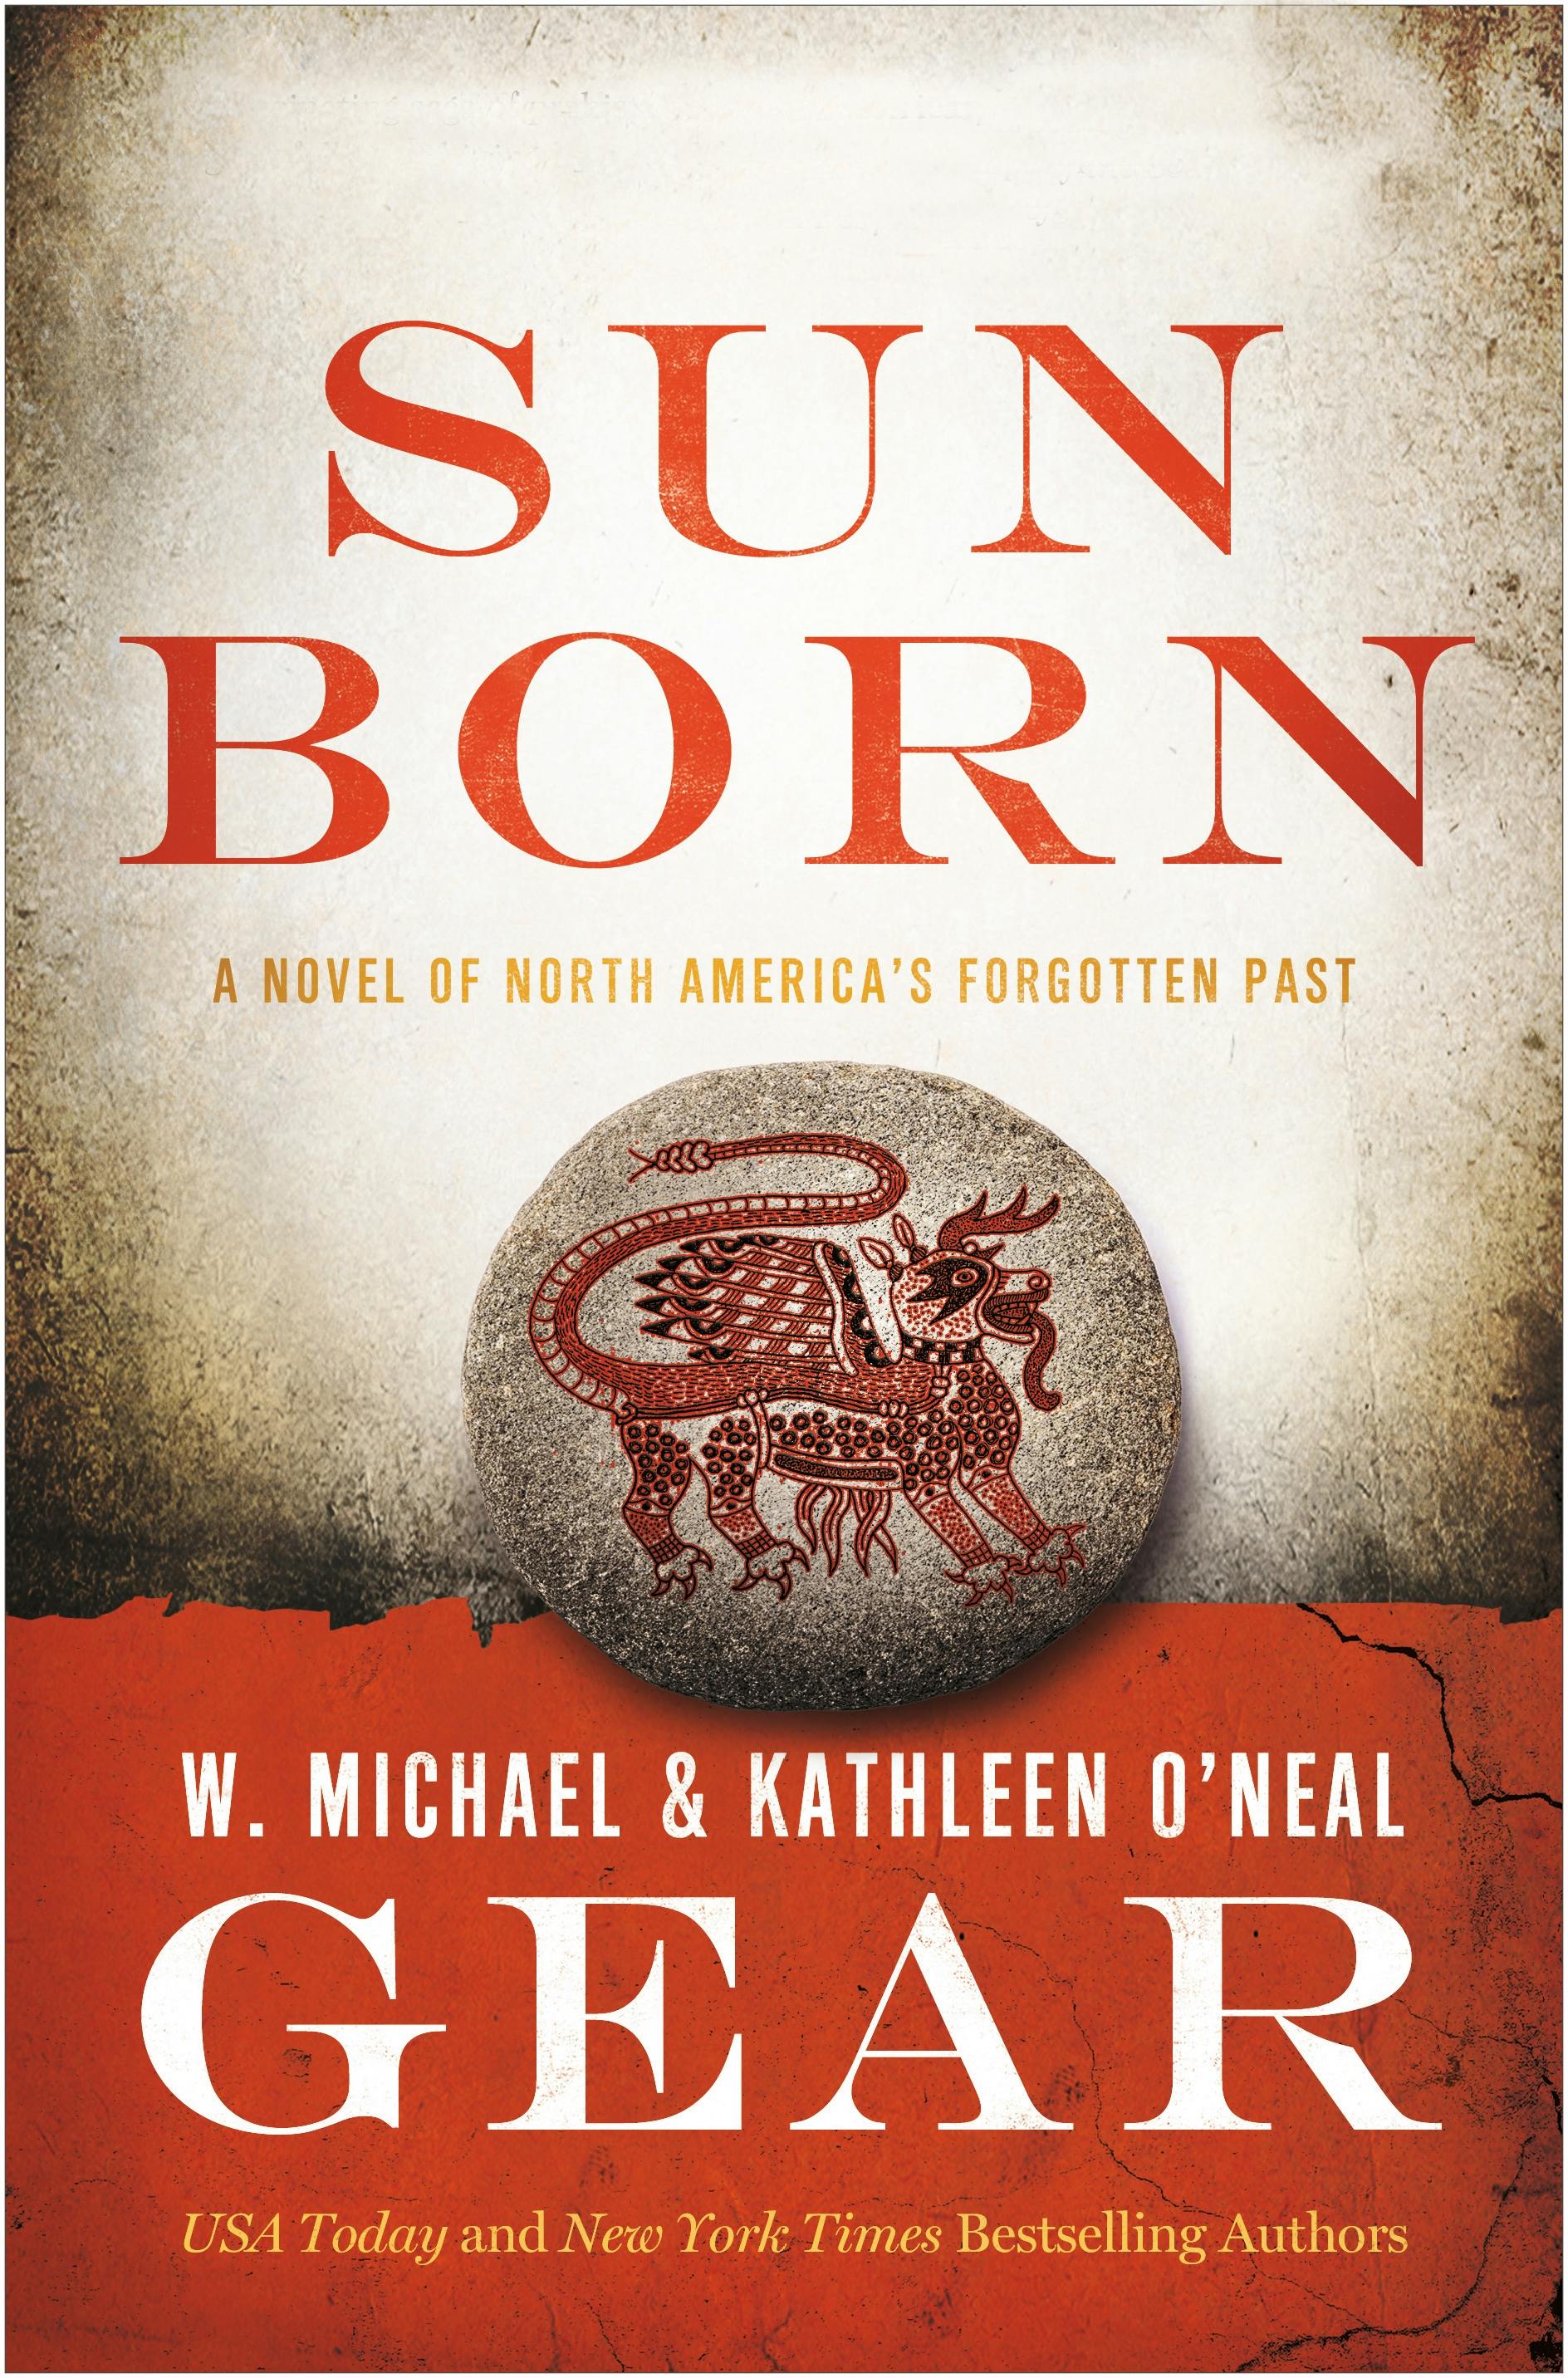 Cover for the book titled as: Sun Born